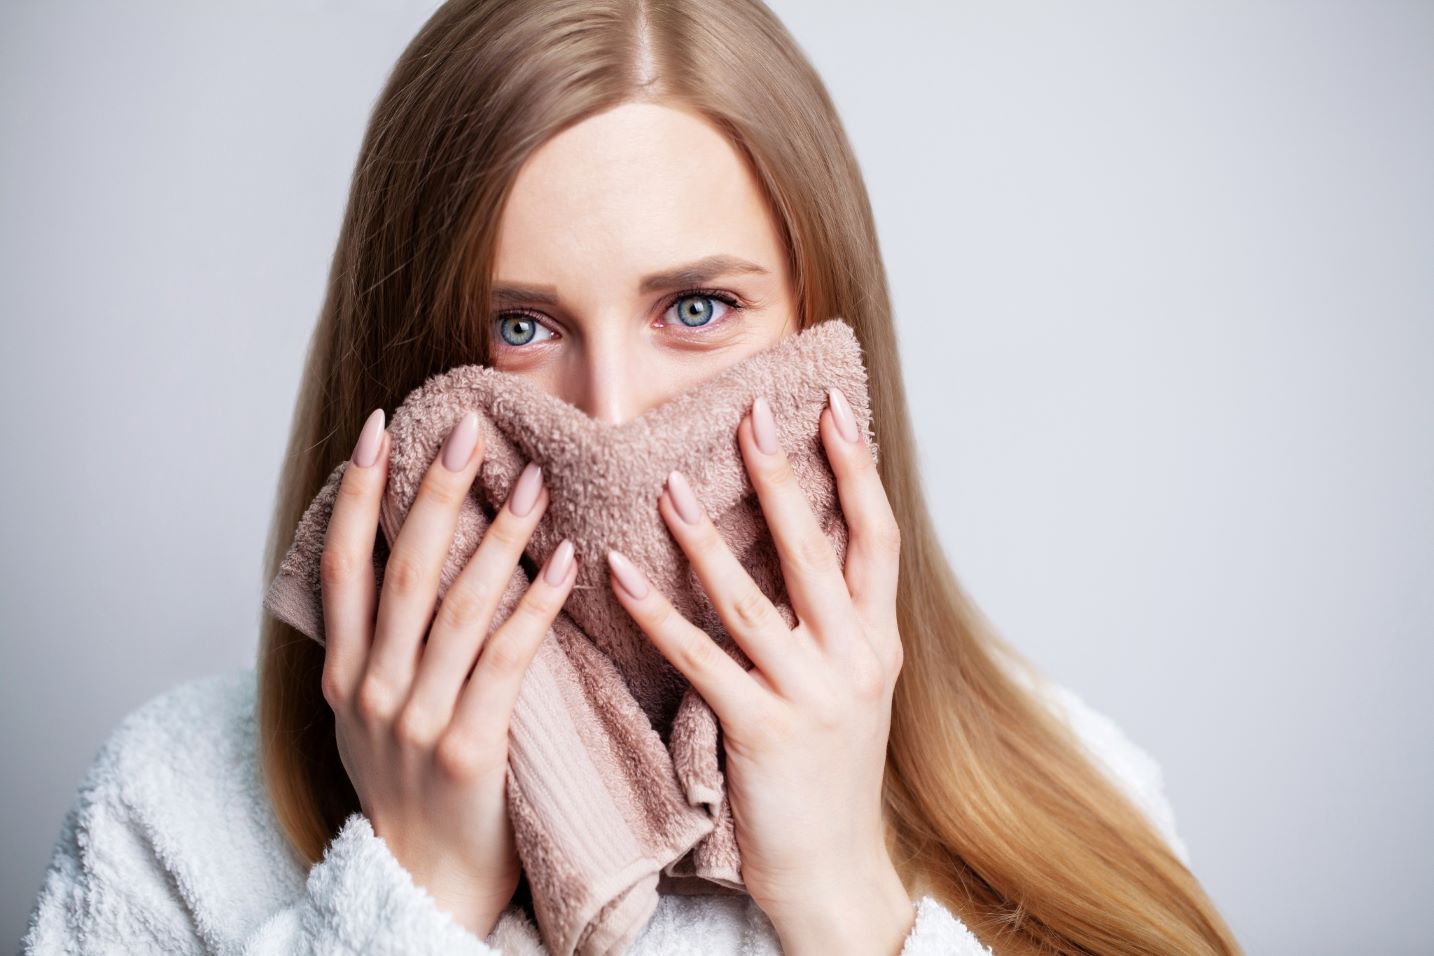 Woman holds a warm damp cloth to her face.